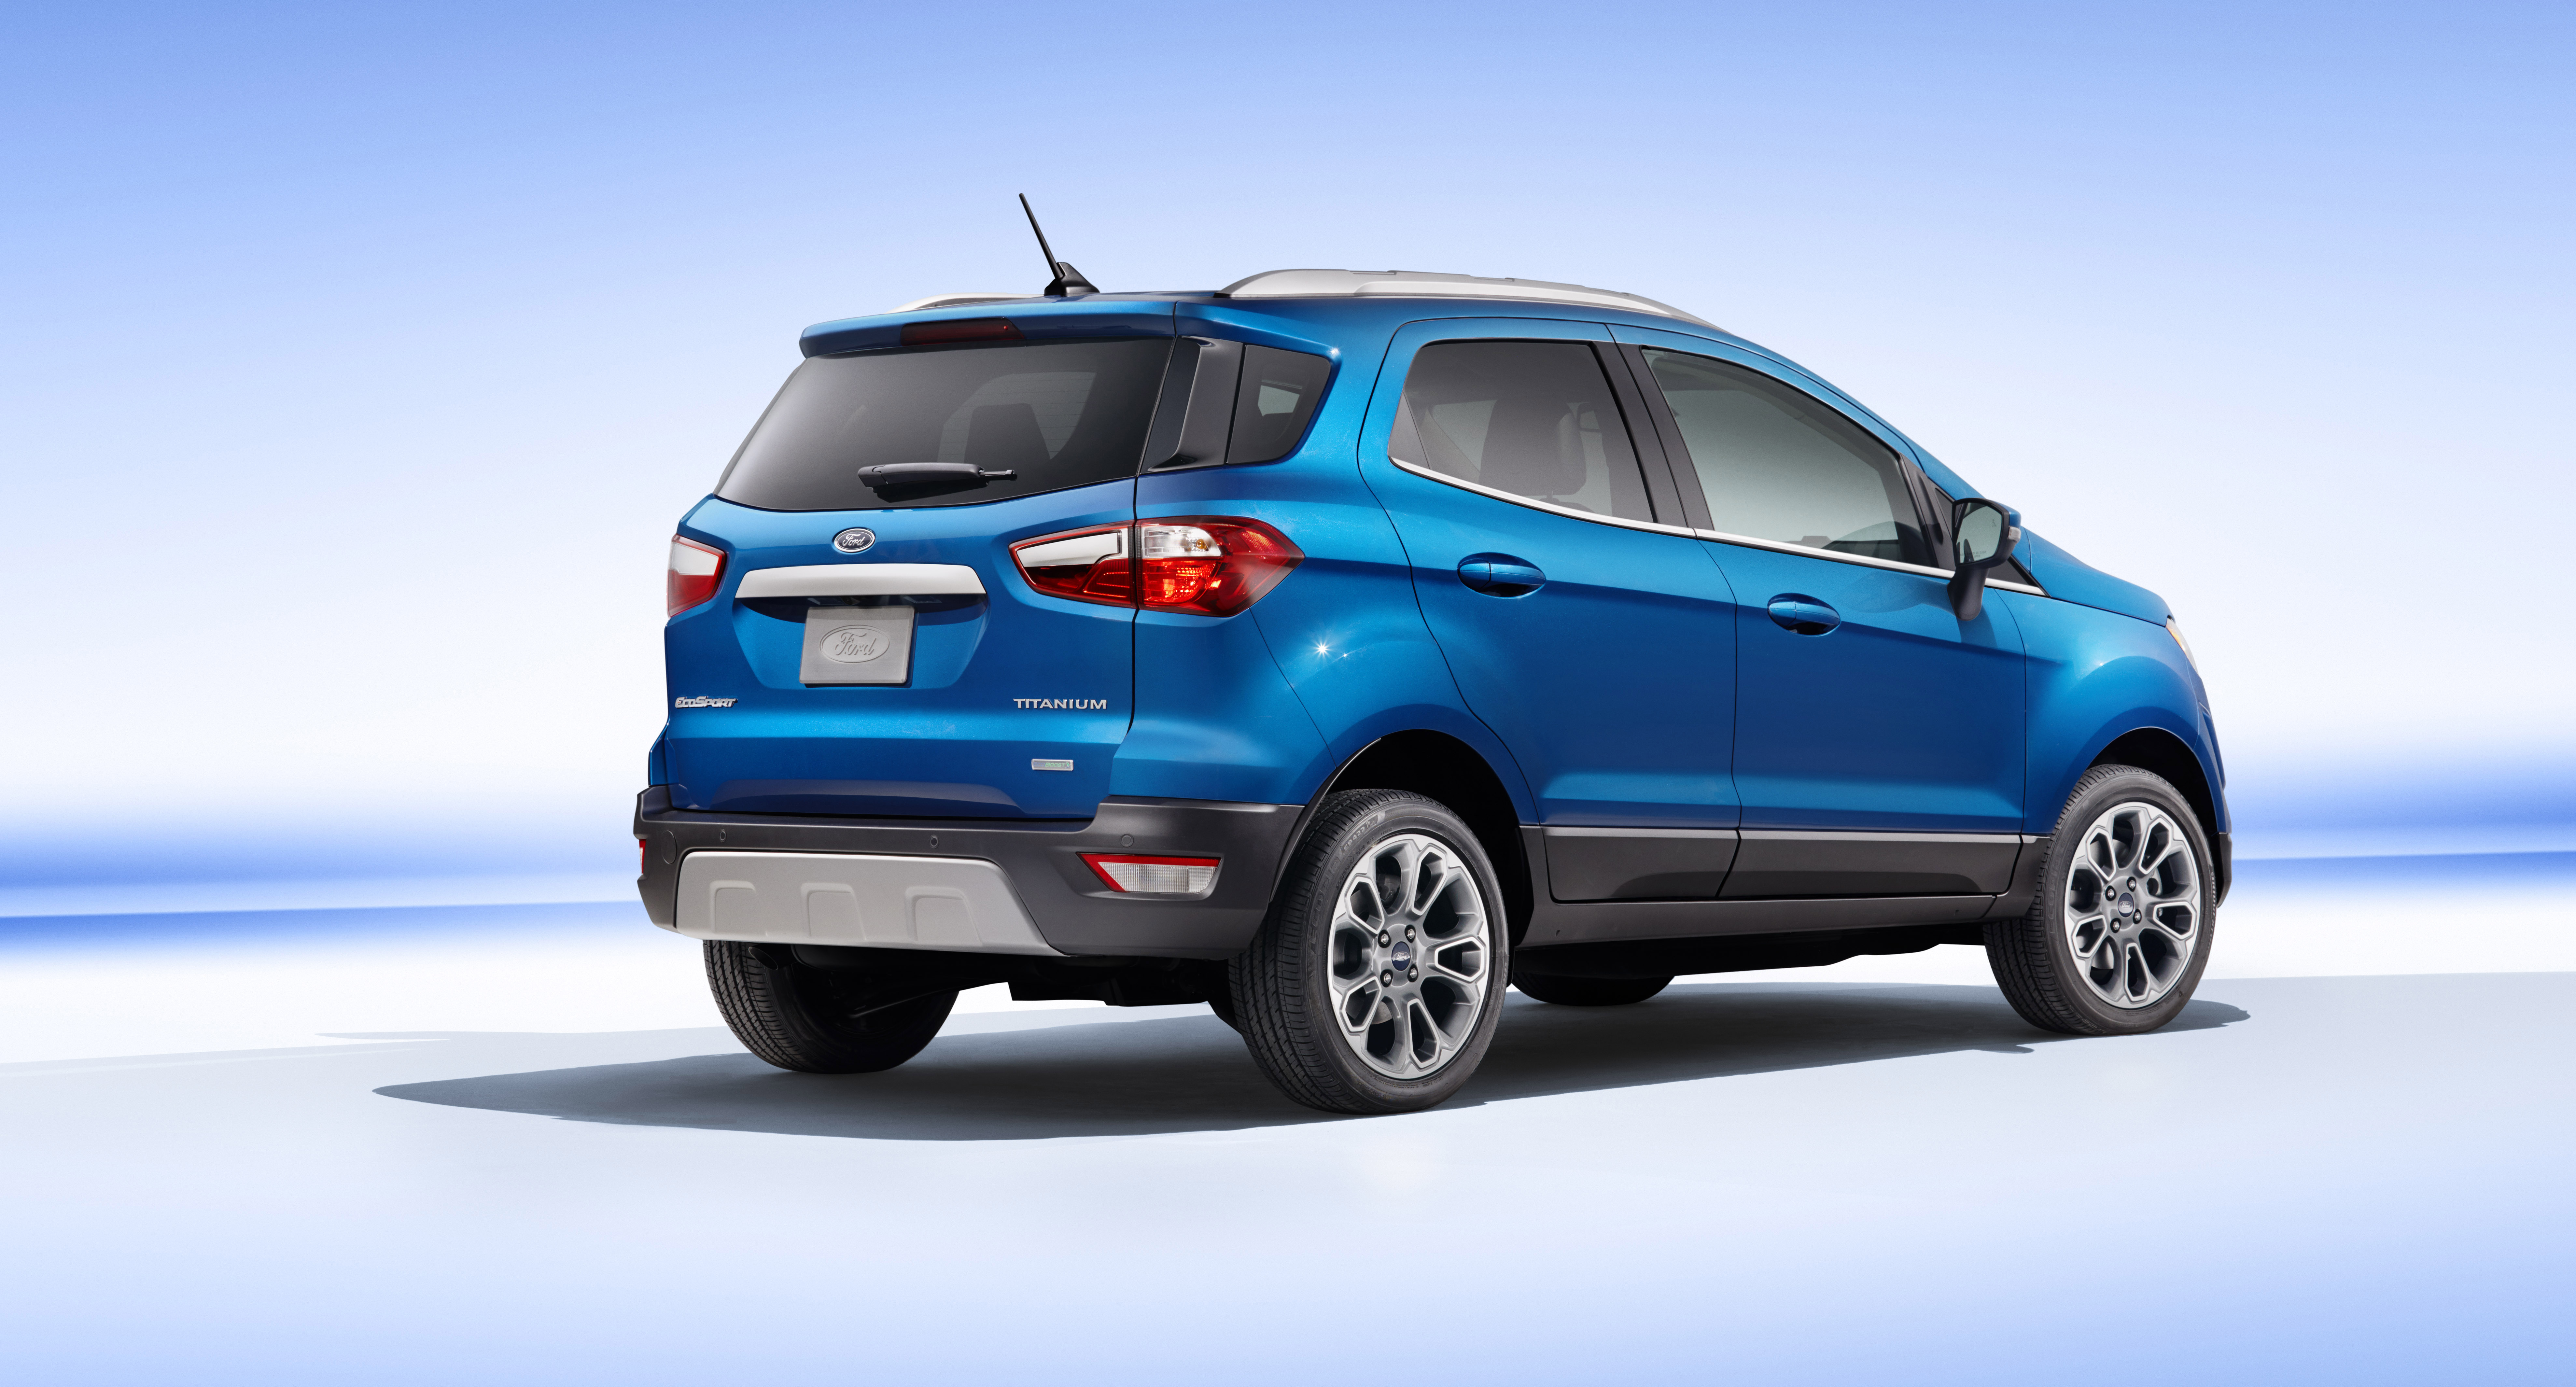 Review: Ford crosses over into the mini-SUV segment with tiny EcoSport